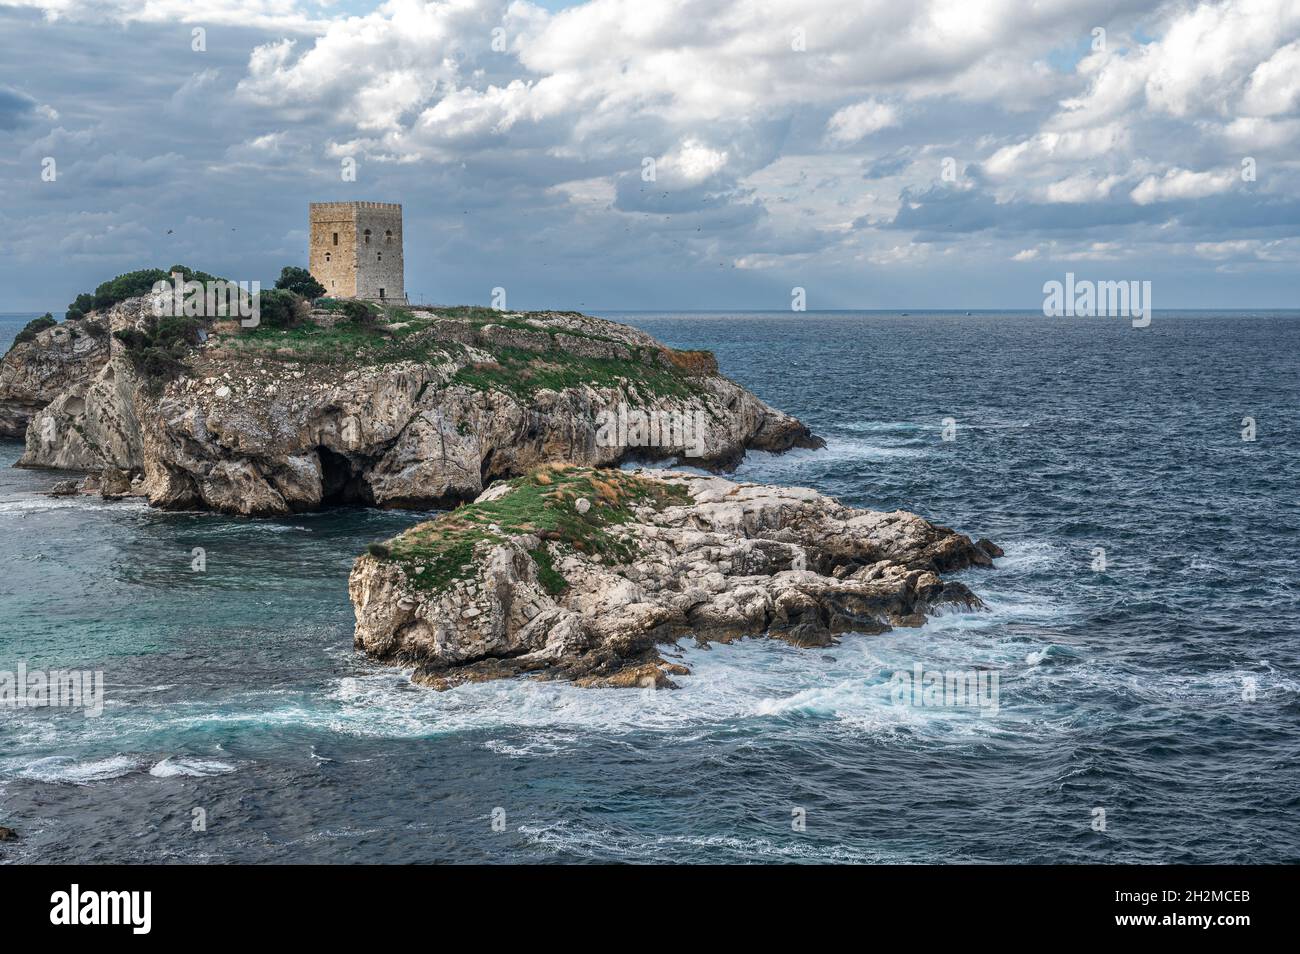 Old fortress on green island inside the sea. Old castle in sea, ocean with a beautiful sky in background. Sile, Istanbul, Turkey Stock Photo